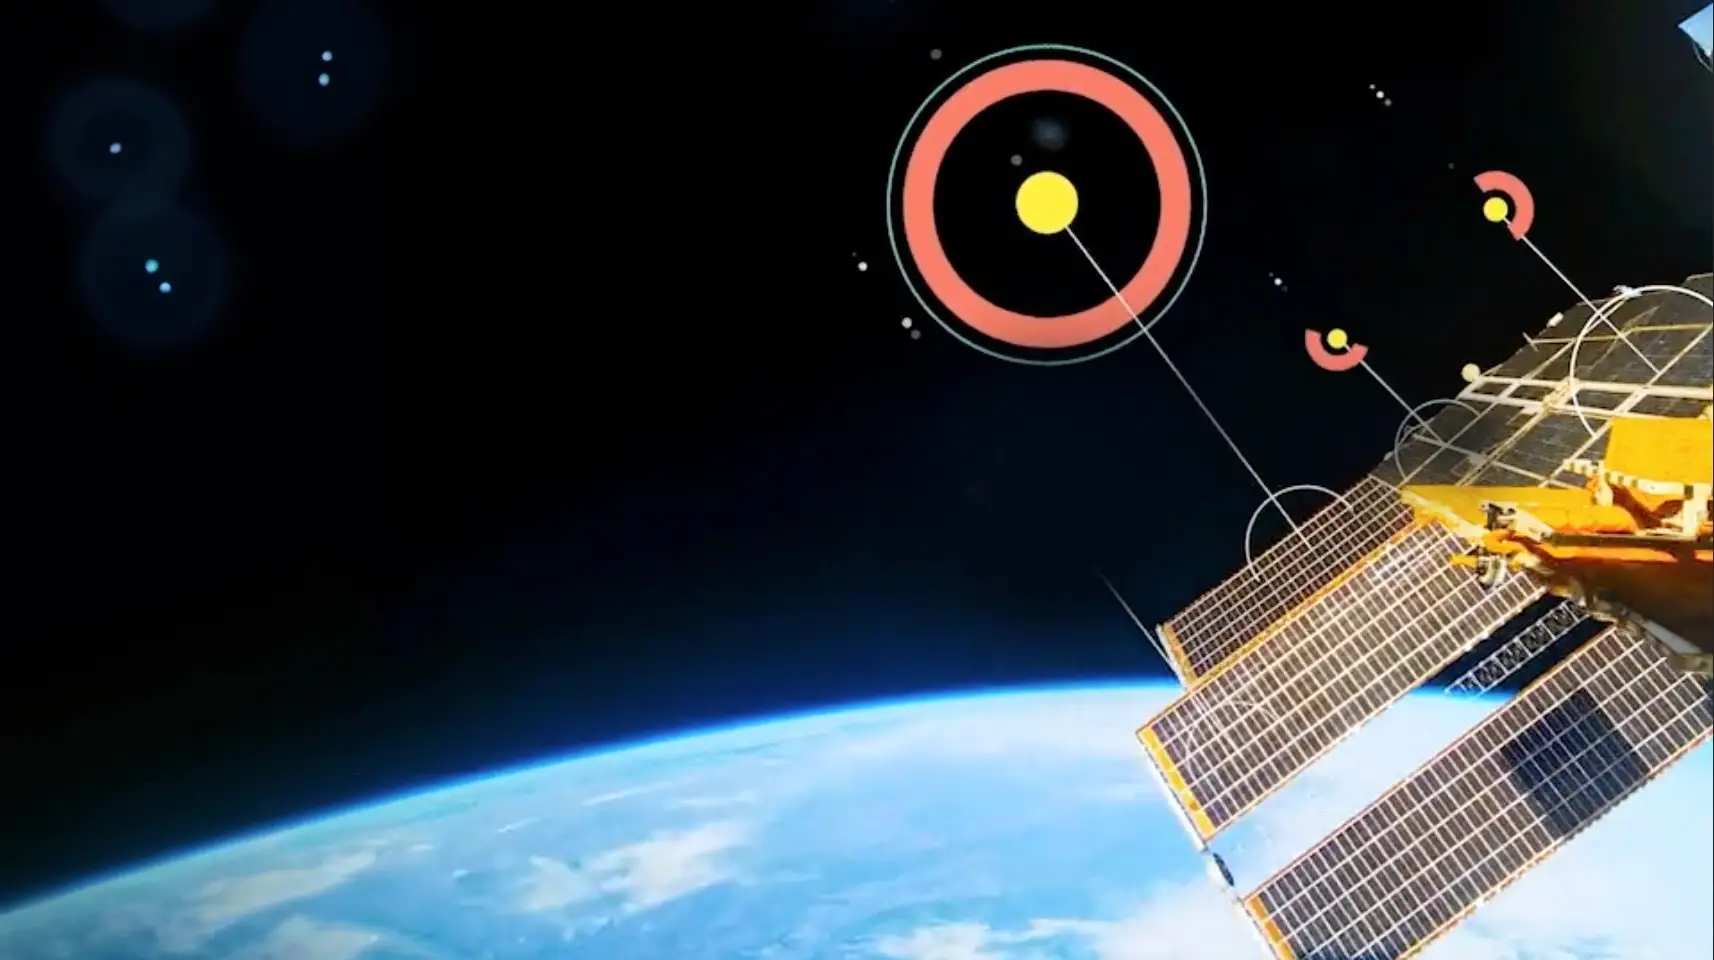 An image of a space station with a satellite in the background inspires content for LIVE 2023.